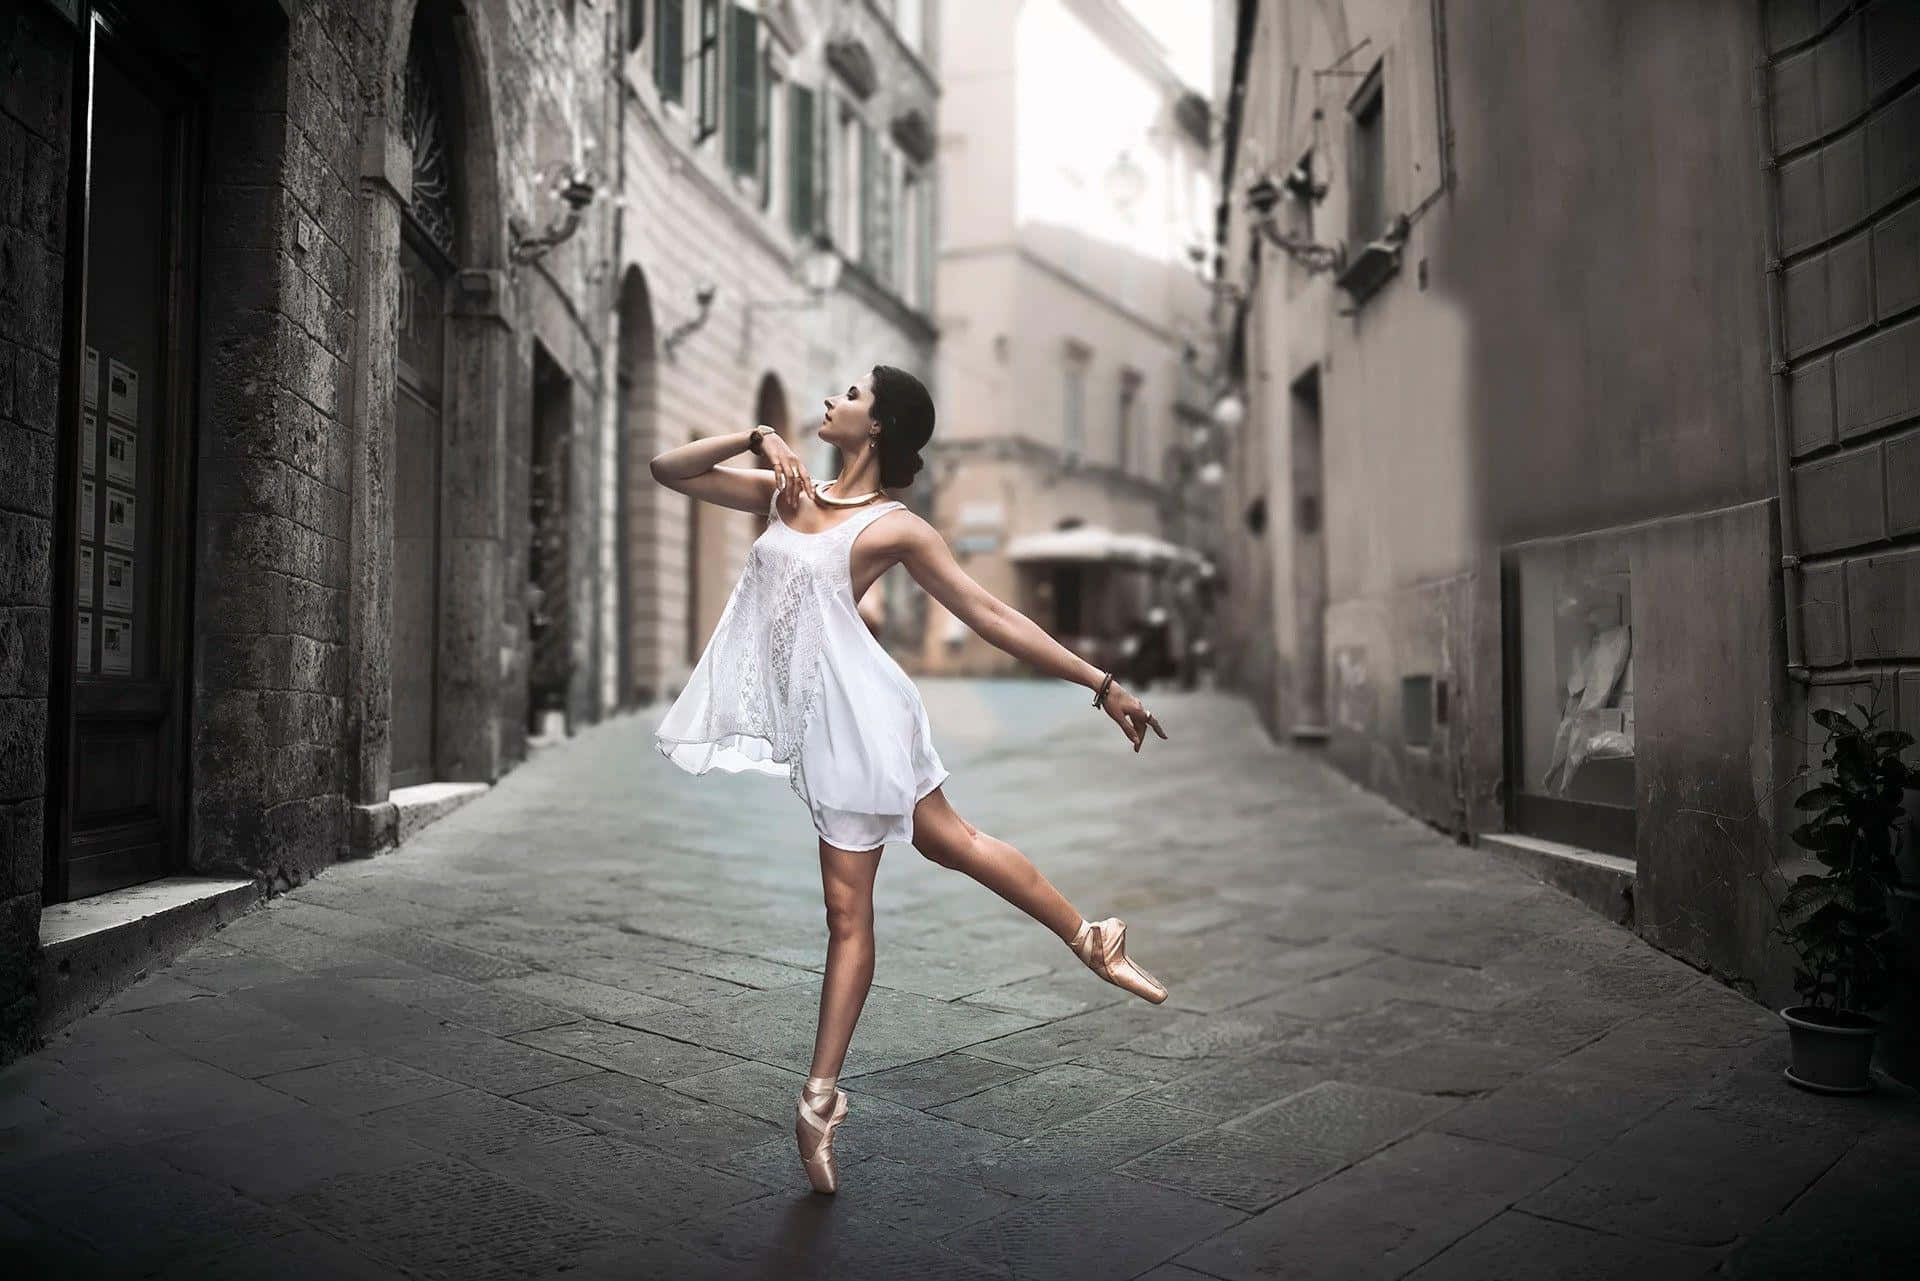 A Young Woman In A White Dress Is Jumping In An Alley